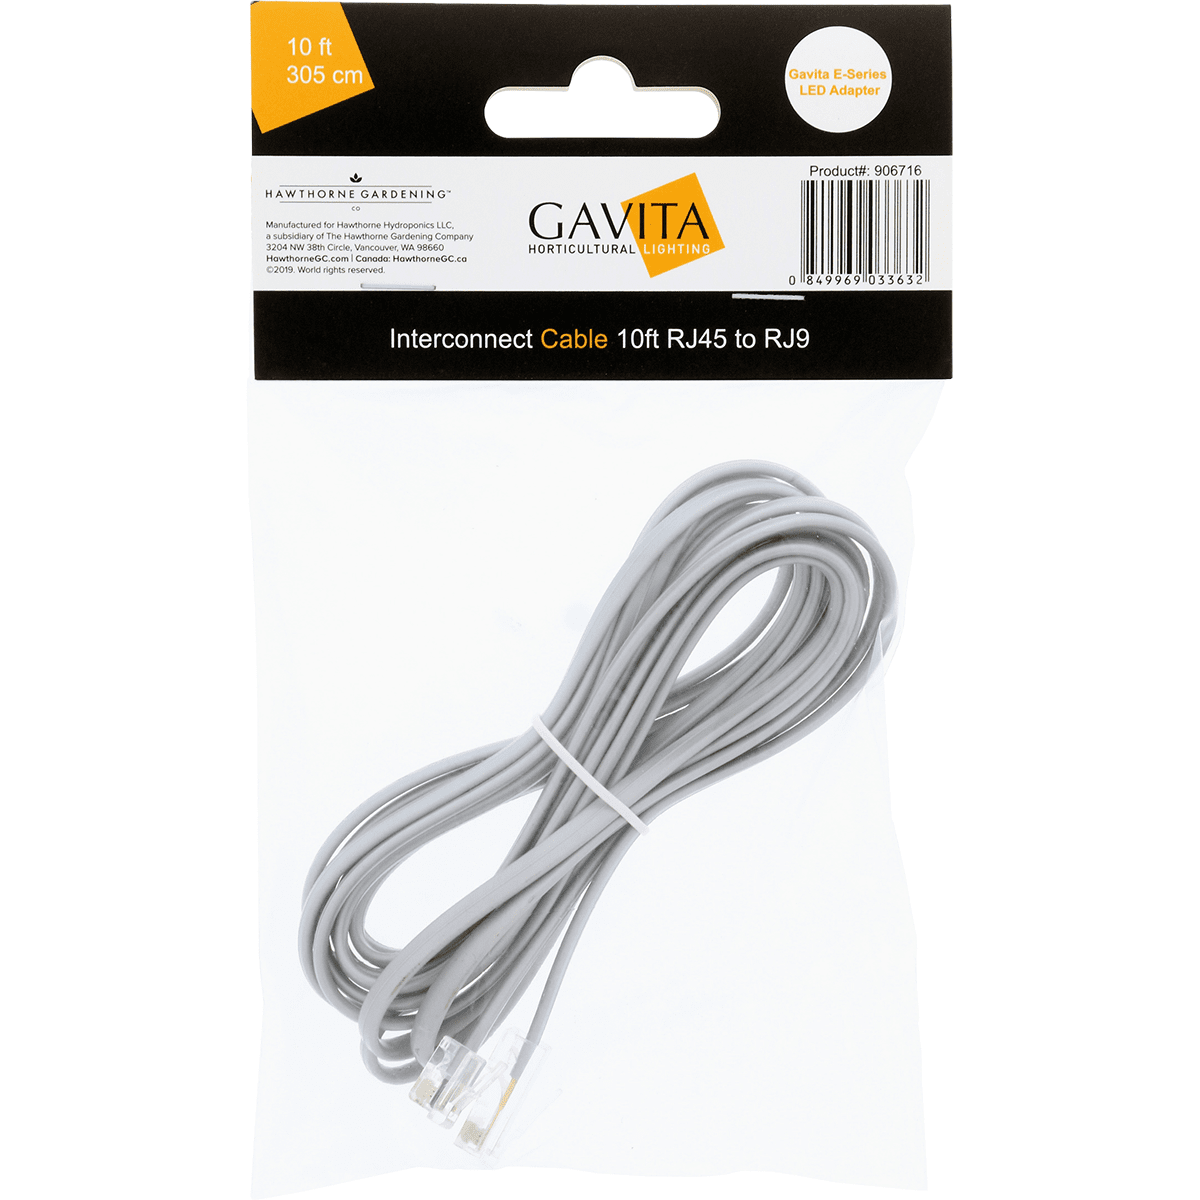 Gavita E-Series LED Adapter Interconnect Cable RJ45 to RJ9 - 10ft